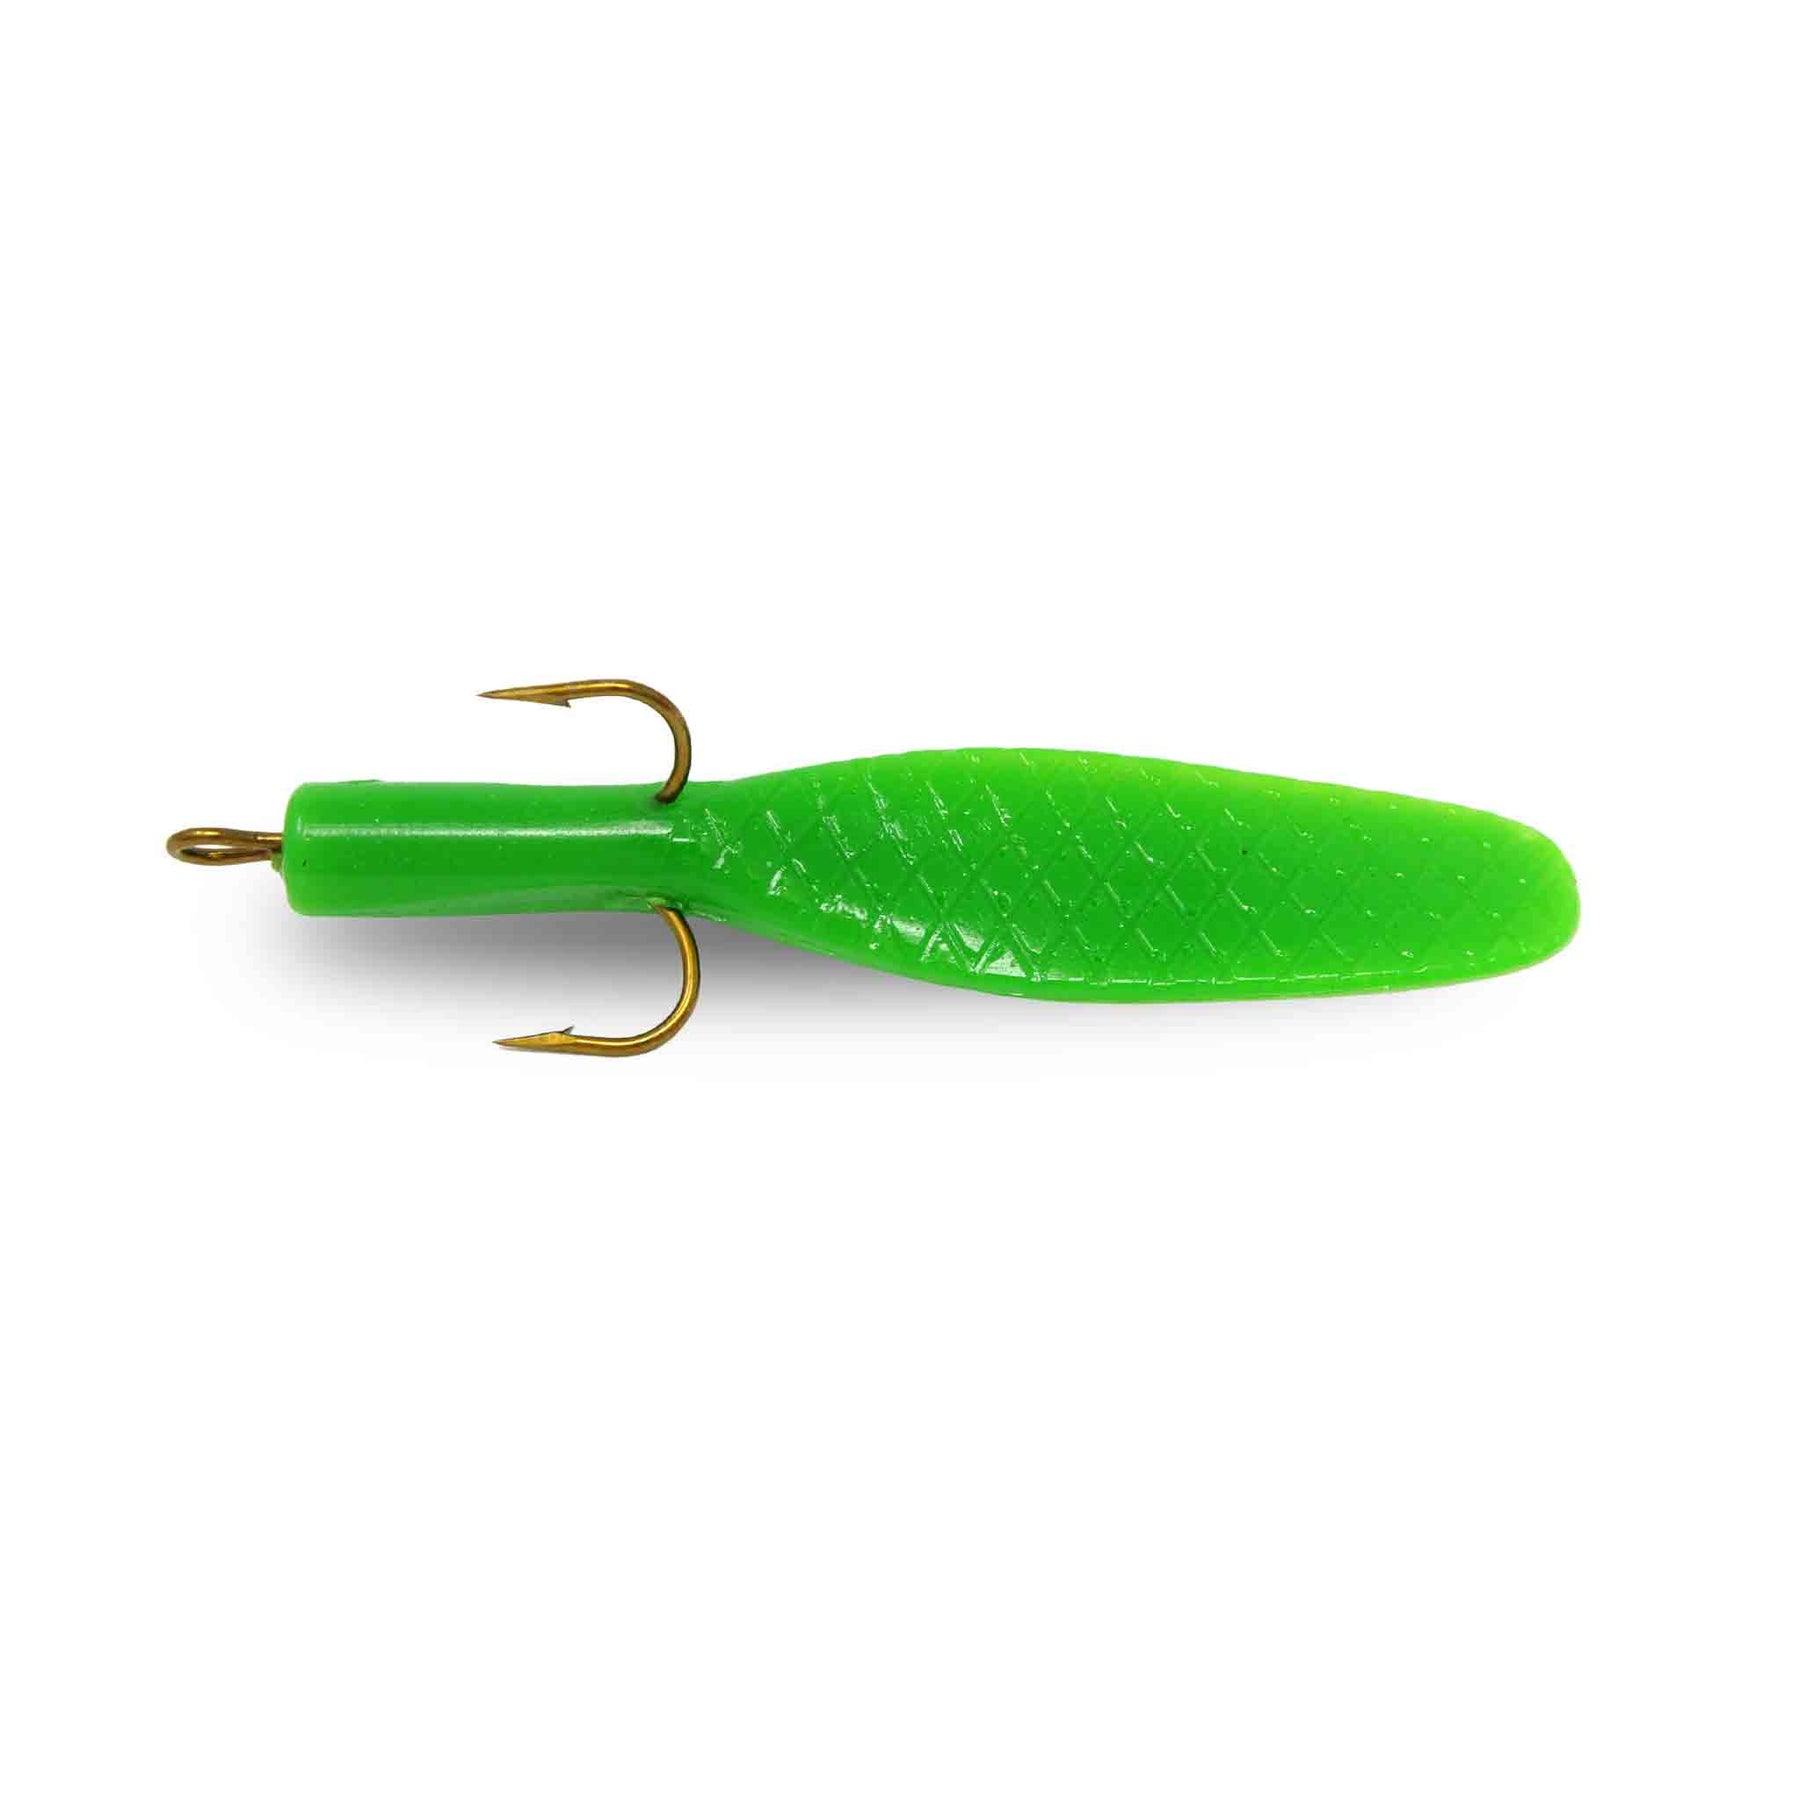 Beaver's Baits Baby Beaver Replacement Tail Lime Replacement Tails